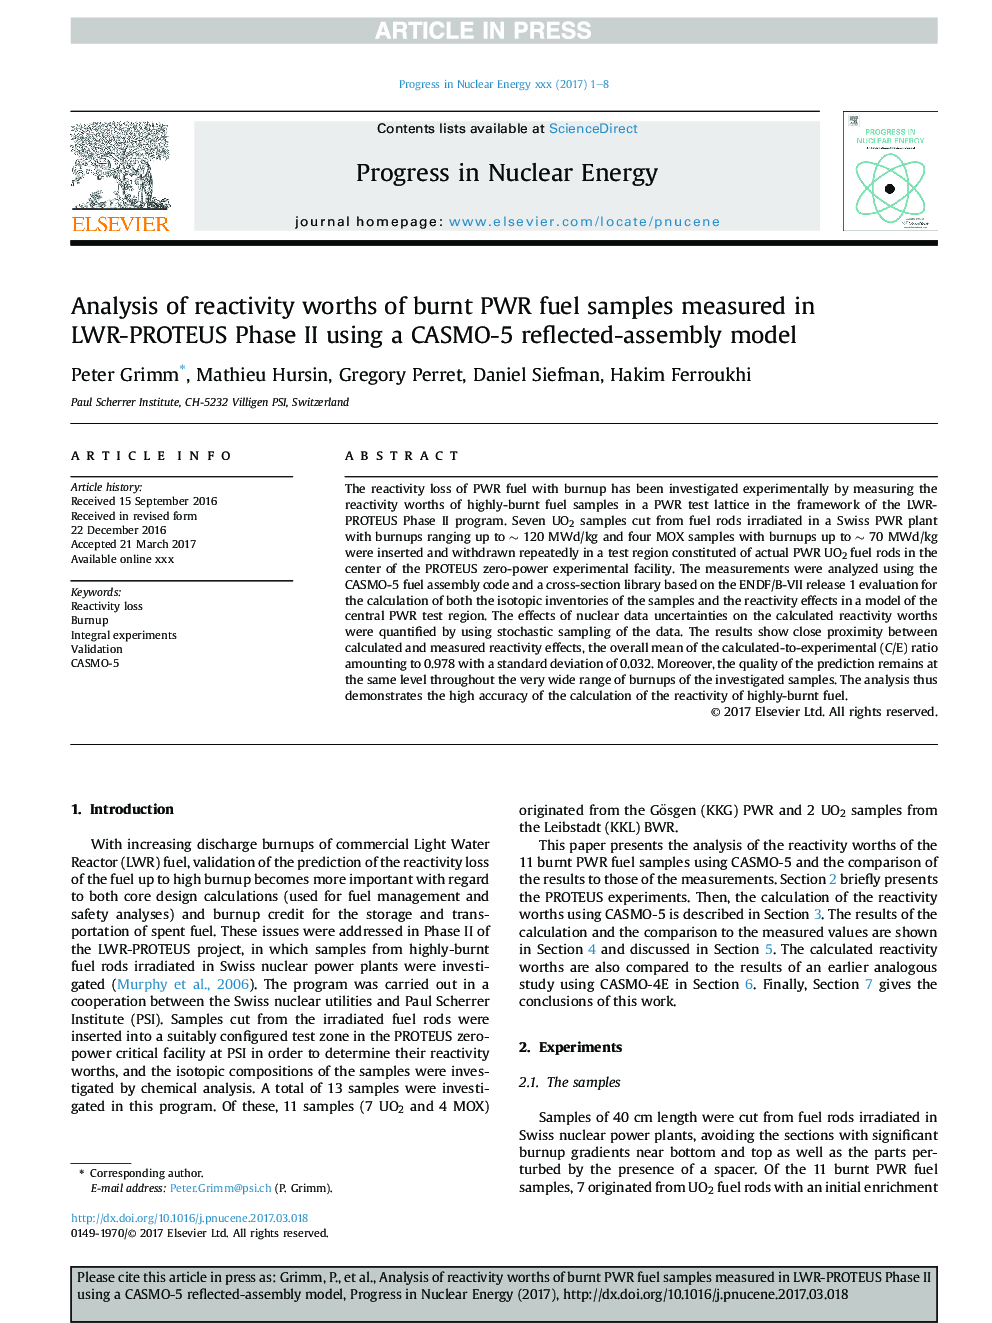 Analysis of reactivity worths of burnt PWR fuel samples measured in LWR-PROTEUS Phase II using a CASMO-5 reflected-assembly model